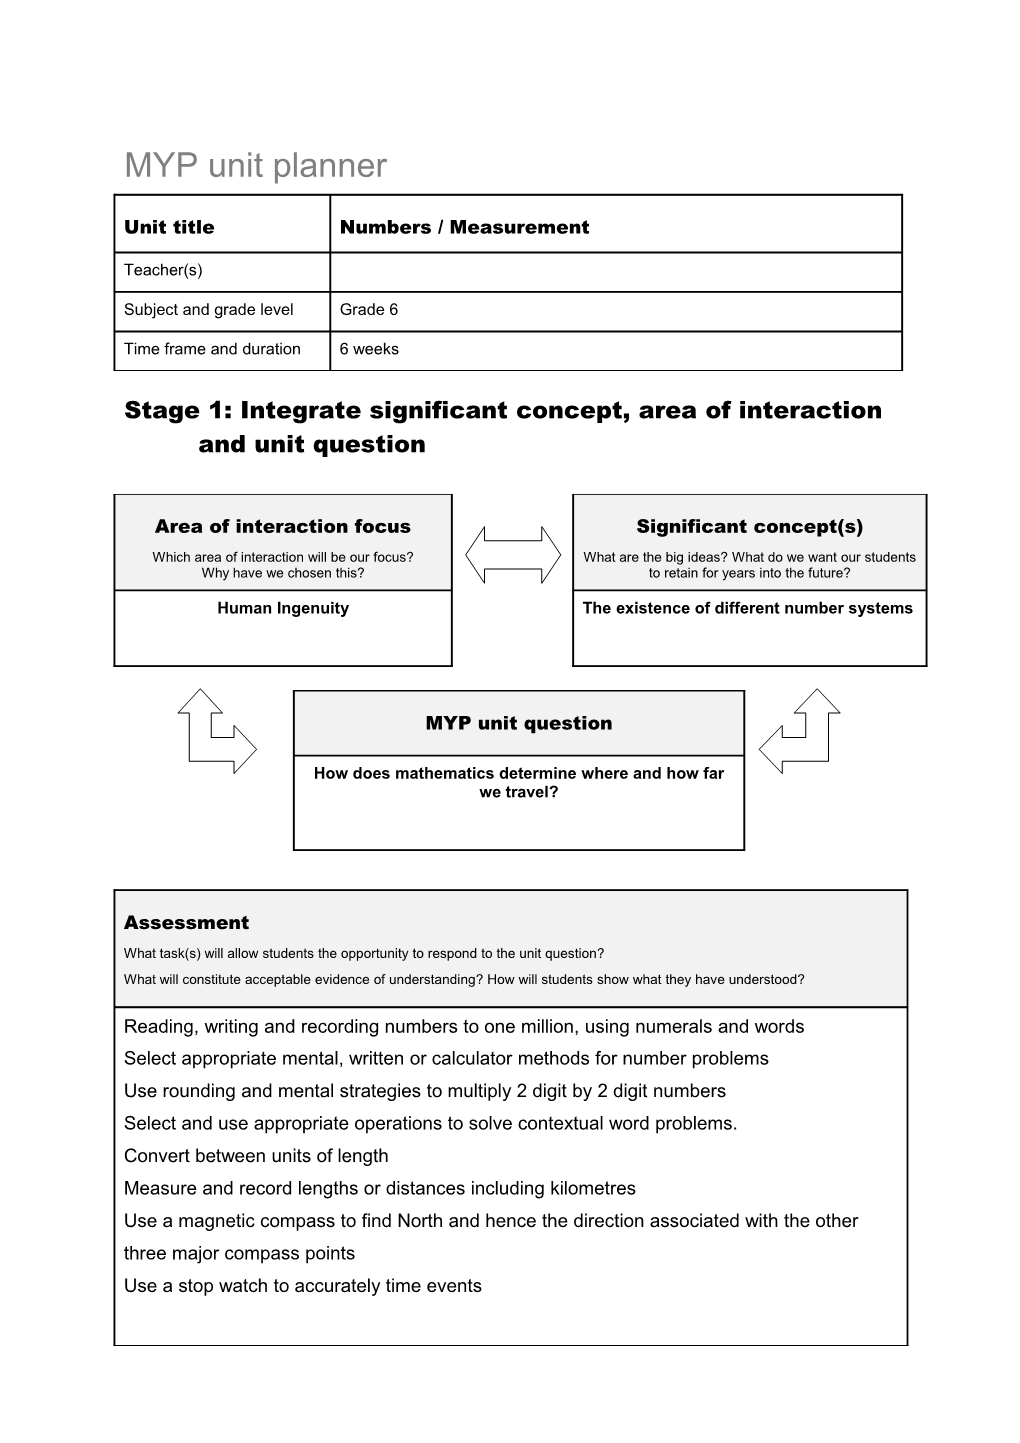 Stage 1: Integrate Significant Concept, Area of Interaction and Unit Question s2